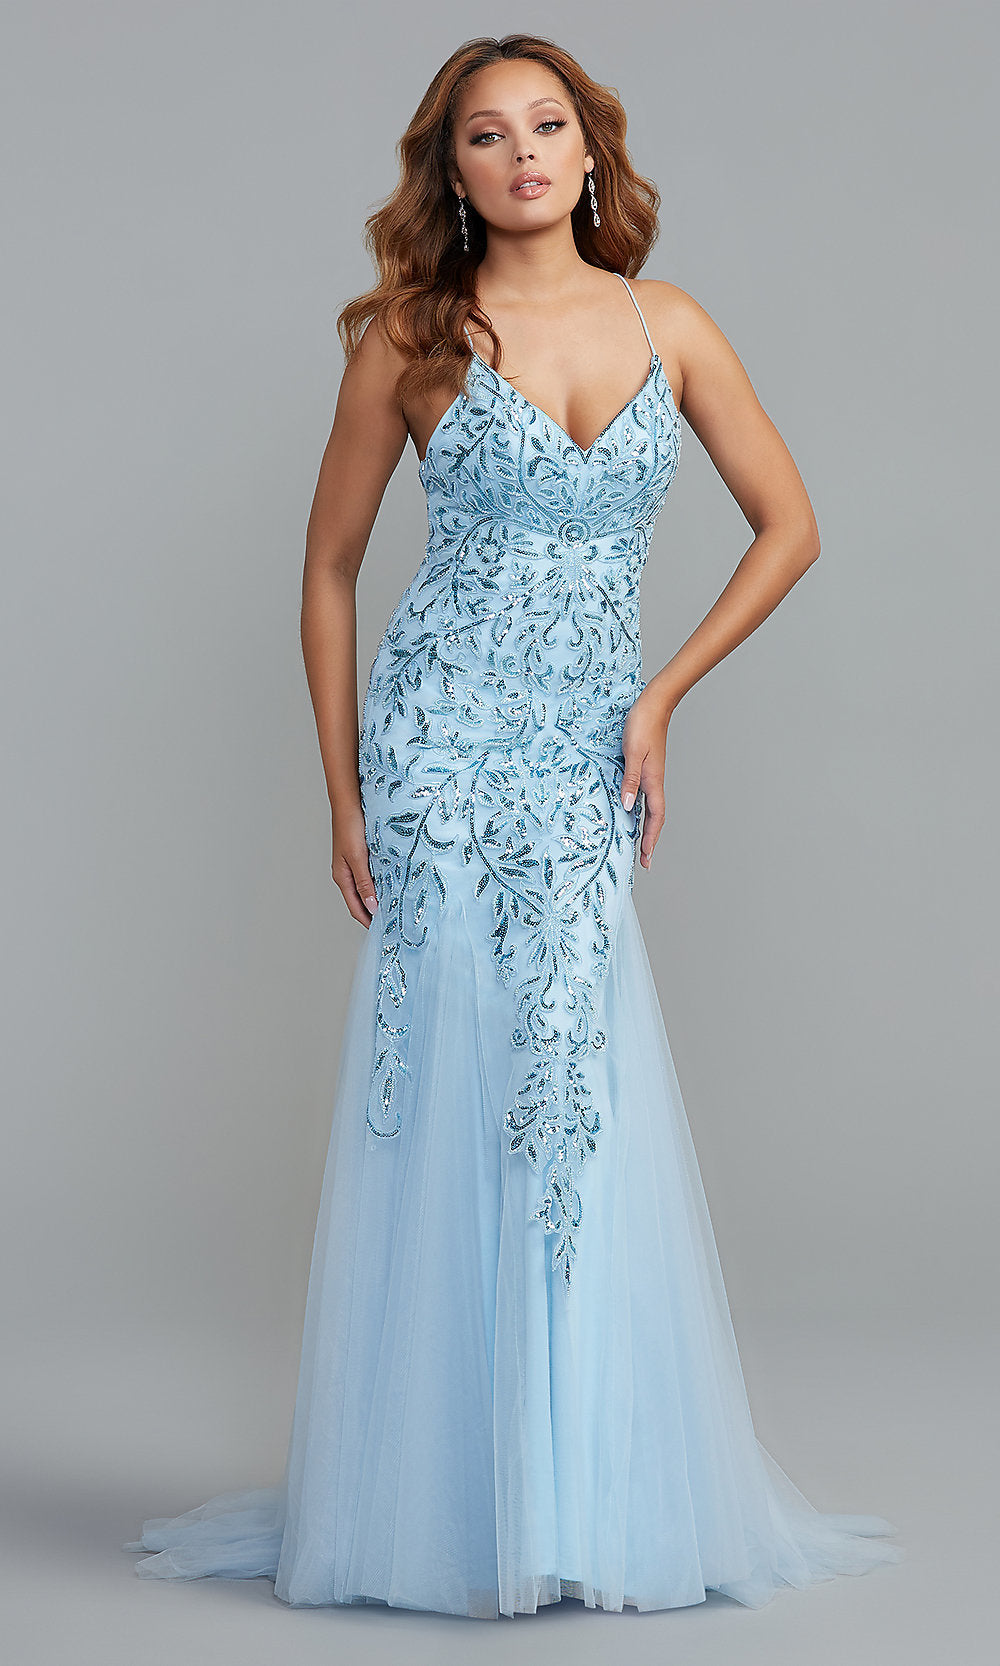 Long Mermaid Prom Gown with Sequins - PromGirl